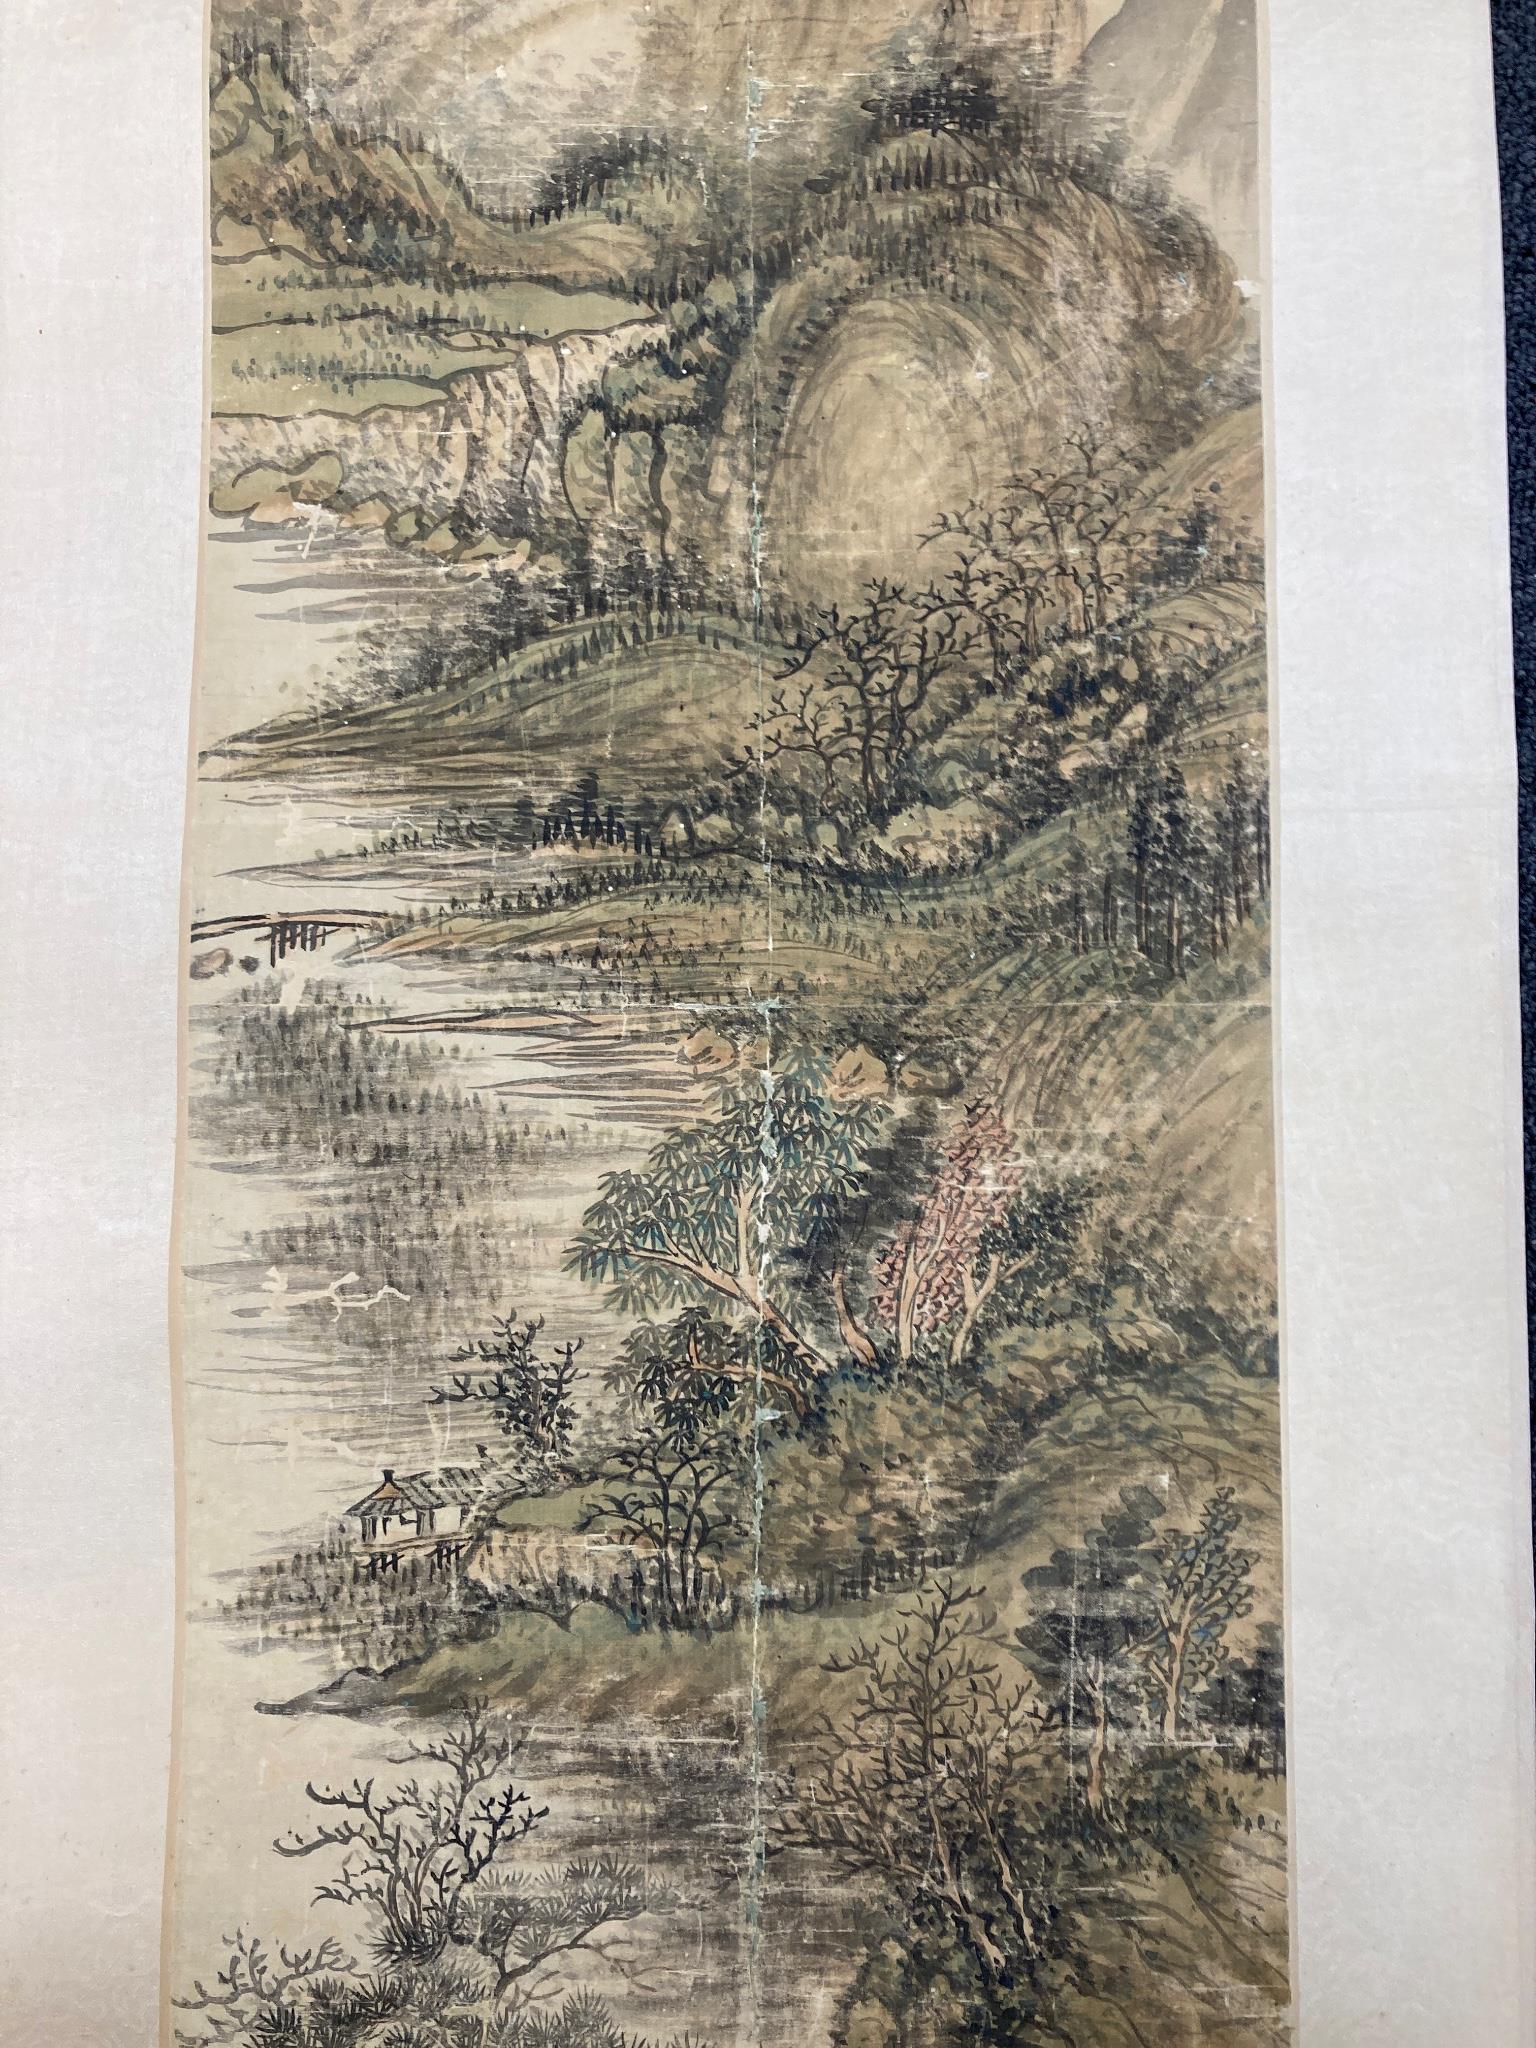 A Chinese landscape scroll painting on silk, Qing dynasty inscribed and signed, artist’s seal and collector’s seal lower left, image 139cm x 27.5cm, remounted